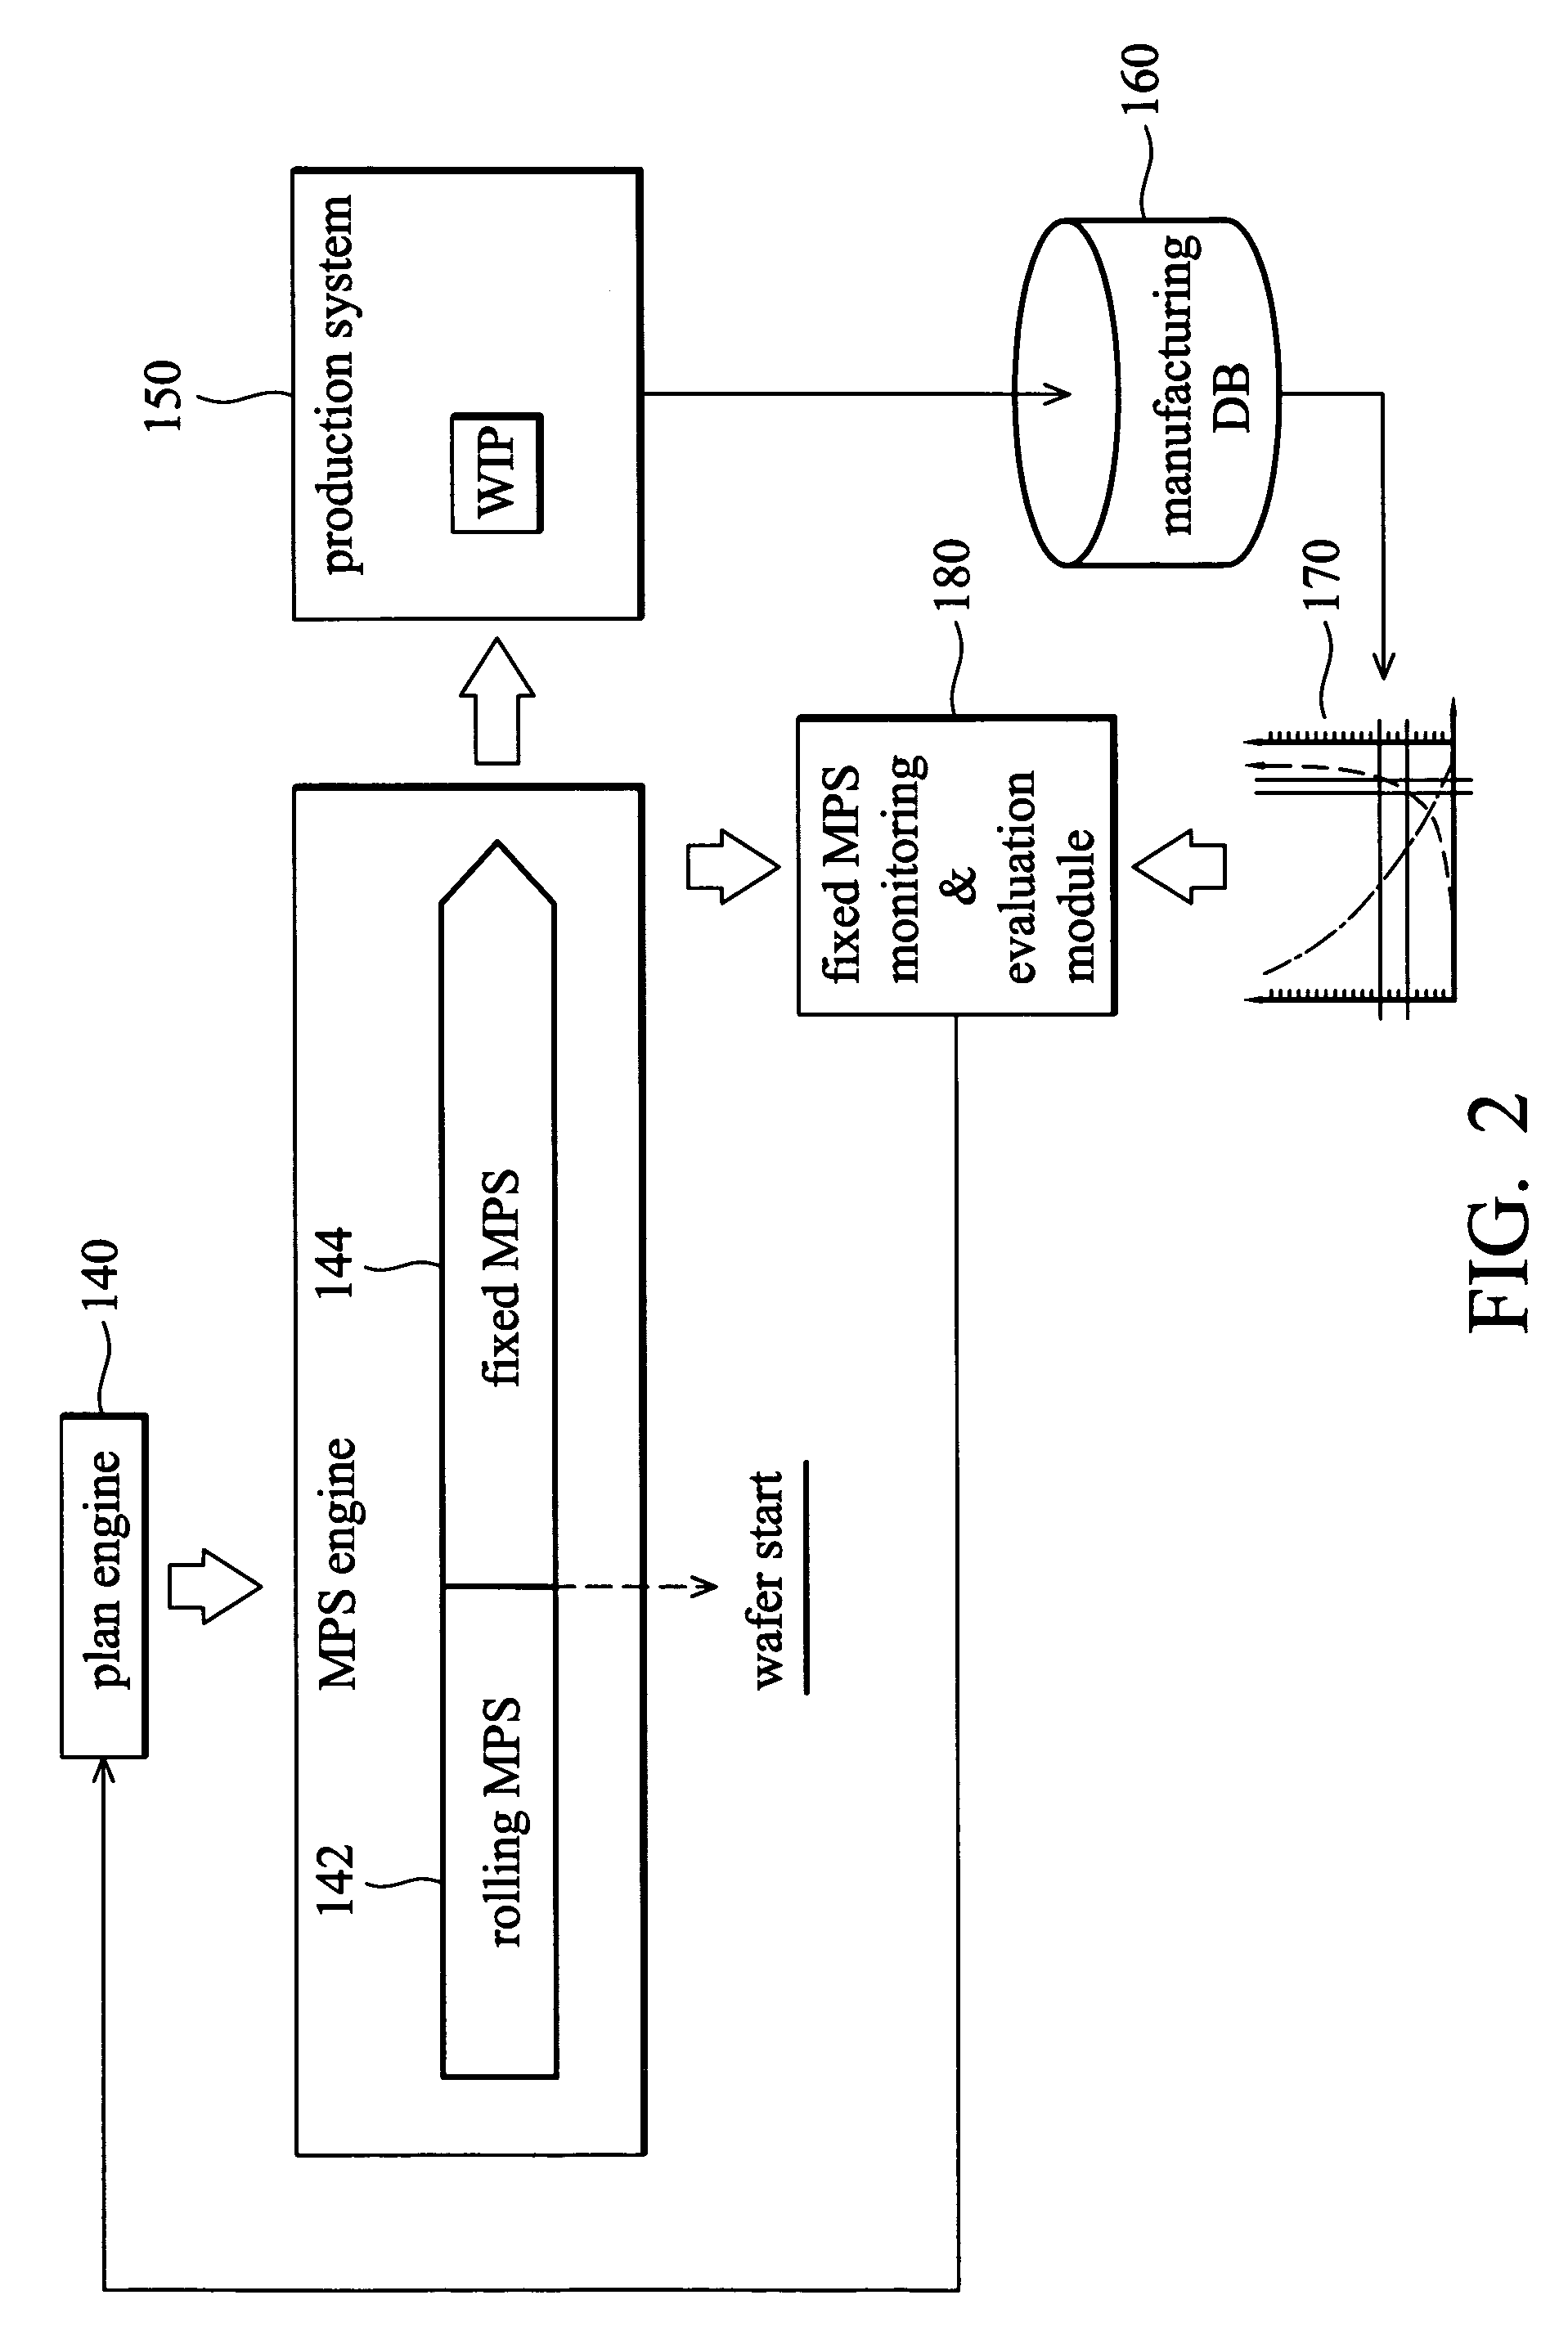 System and method for manufacturing planning and control